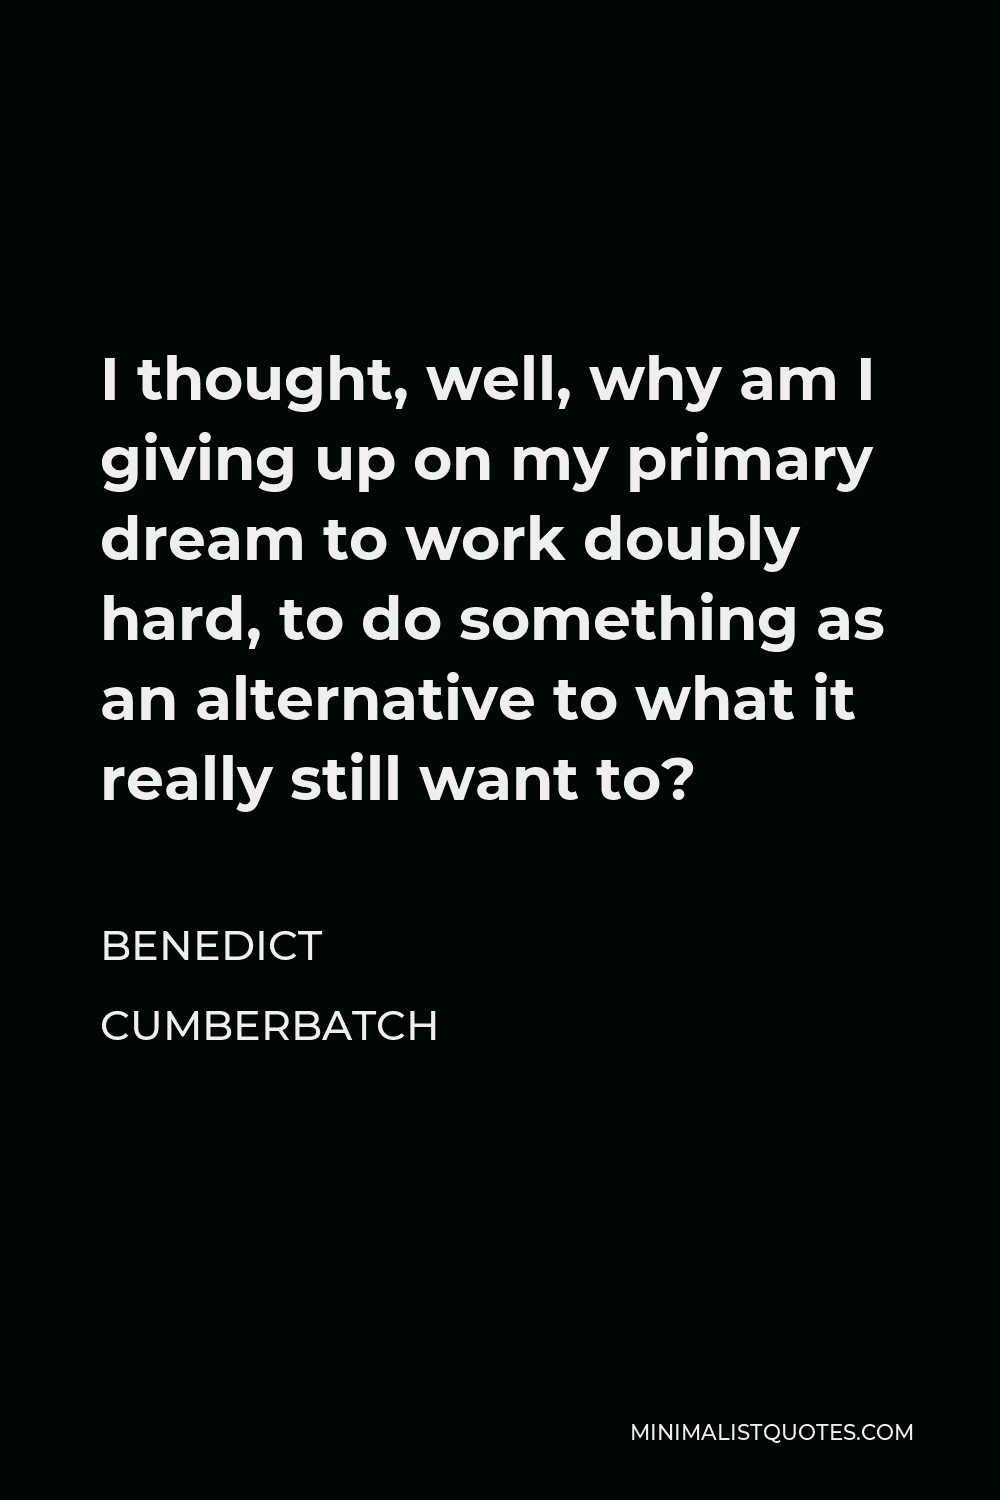 Benedict Cumberbatch Quote - I thought, well, why am I giving up on my primary dream to work doubly hard, to do something as an alternative to what it really still want to?